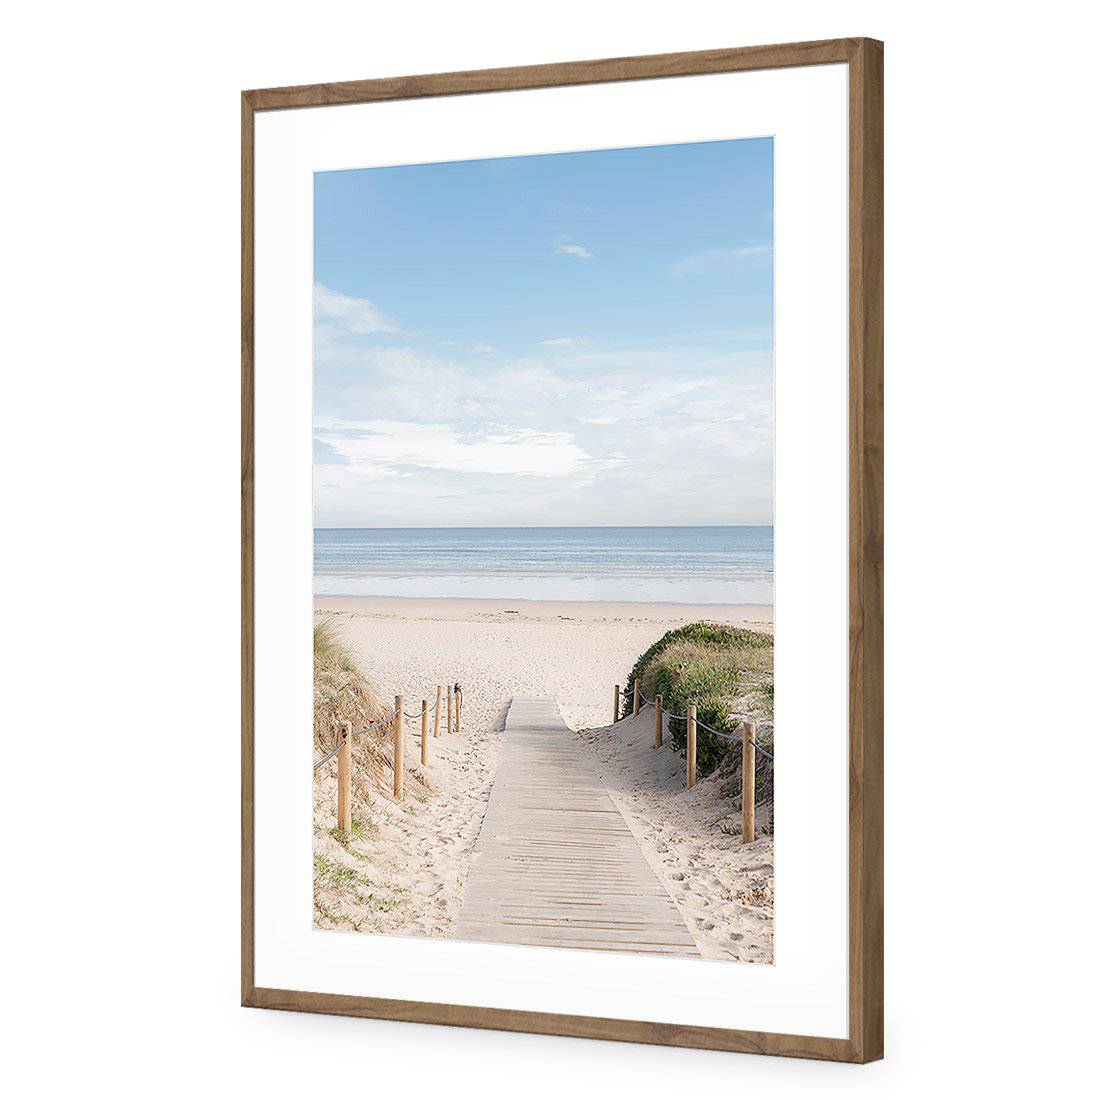 Pathway To The Sea-Acrylic-Wall Art Design-With Border-Acrylic - Natural Frame-45x30cm-Wall Art Designs